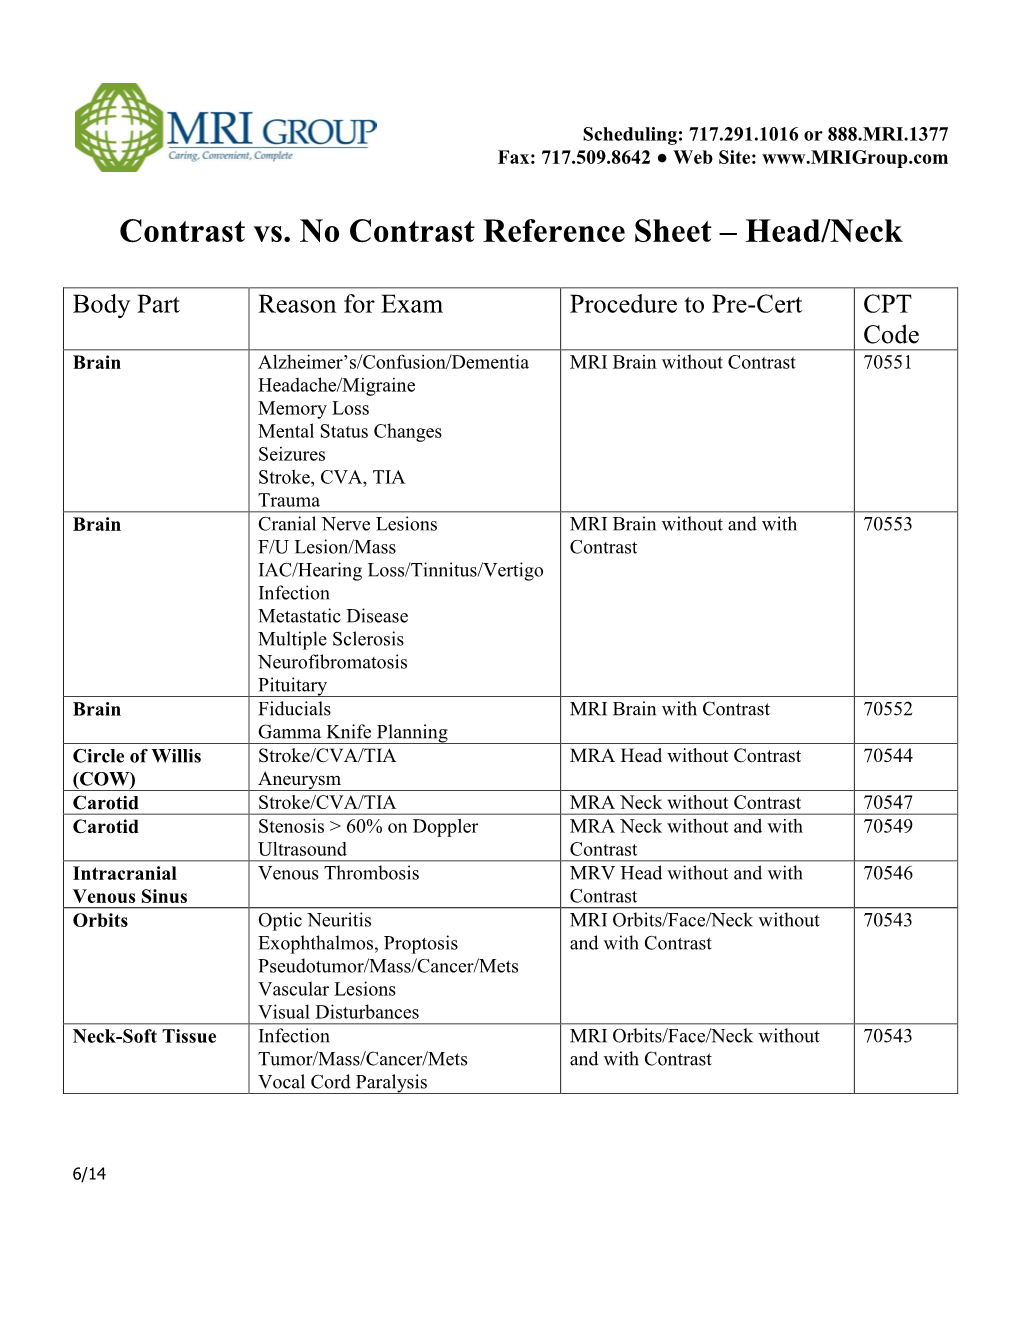 Contrast Vs. No Contrast Reference Sheet – Head/Neck